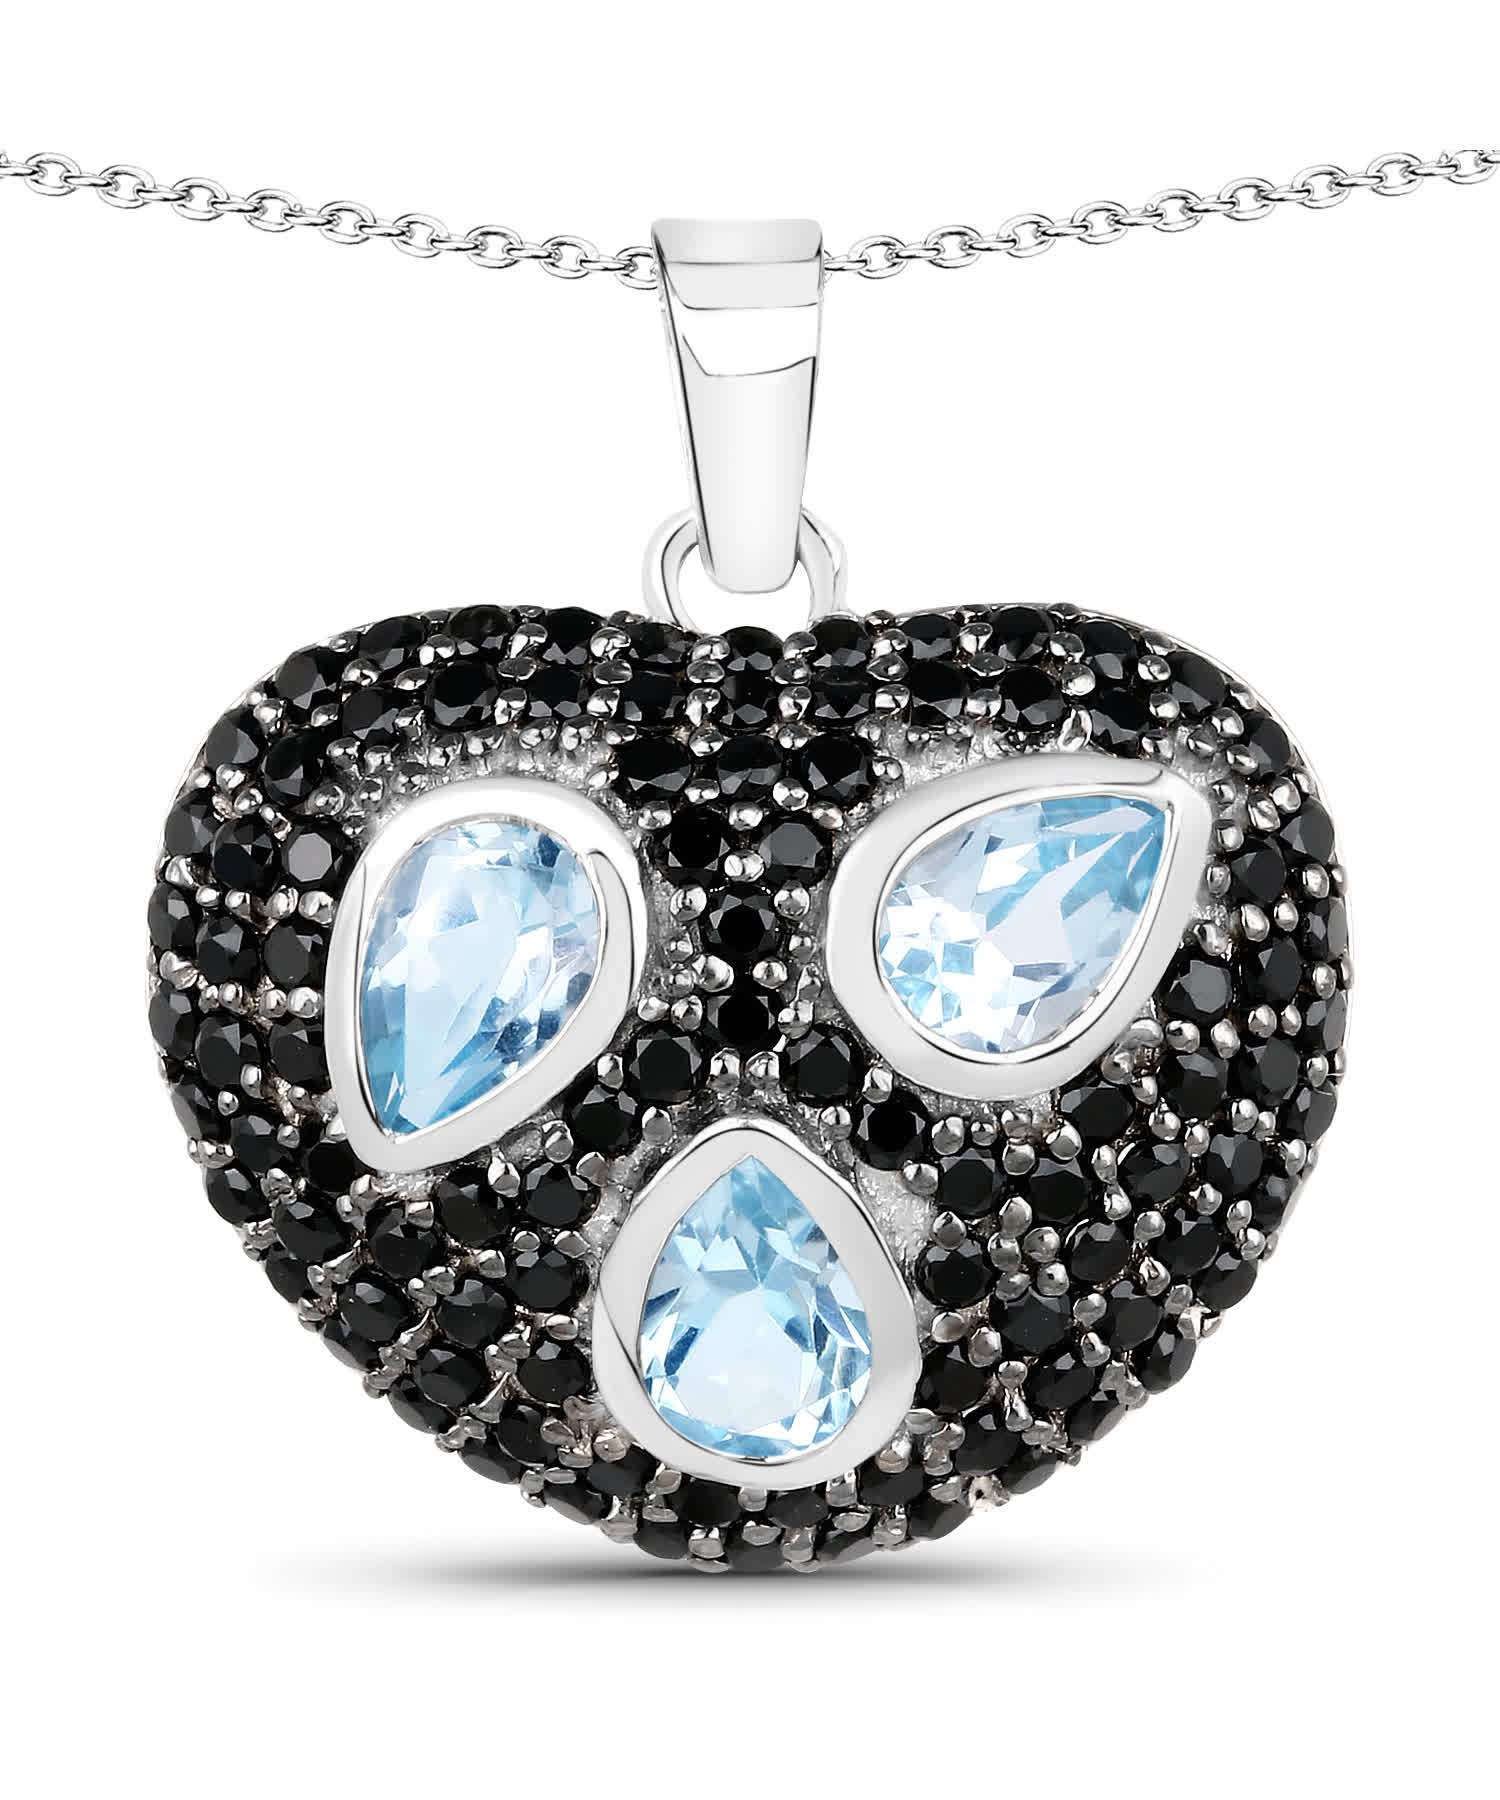 3.39ctw Natural Sky Blue Topaz and Black Spinel Rhodium Plated 925 Sterling Silver Heart Pendant With Chain View 1